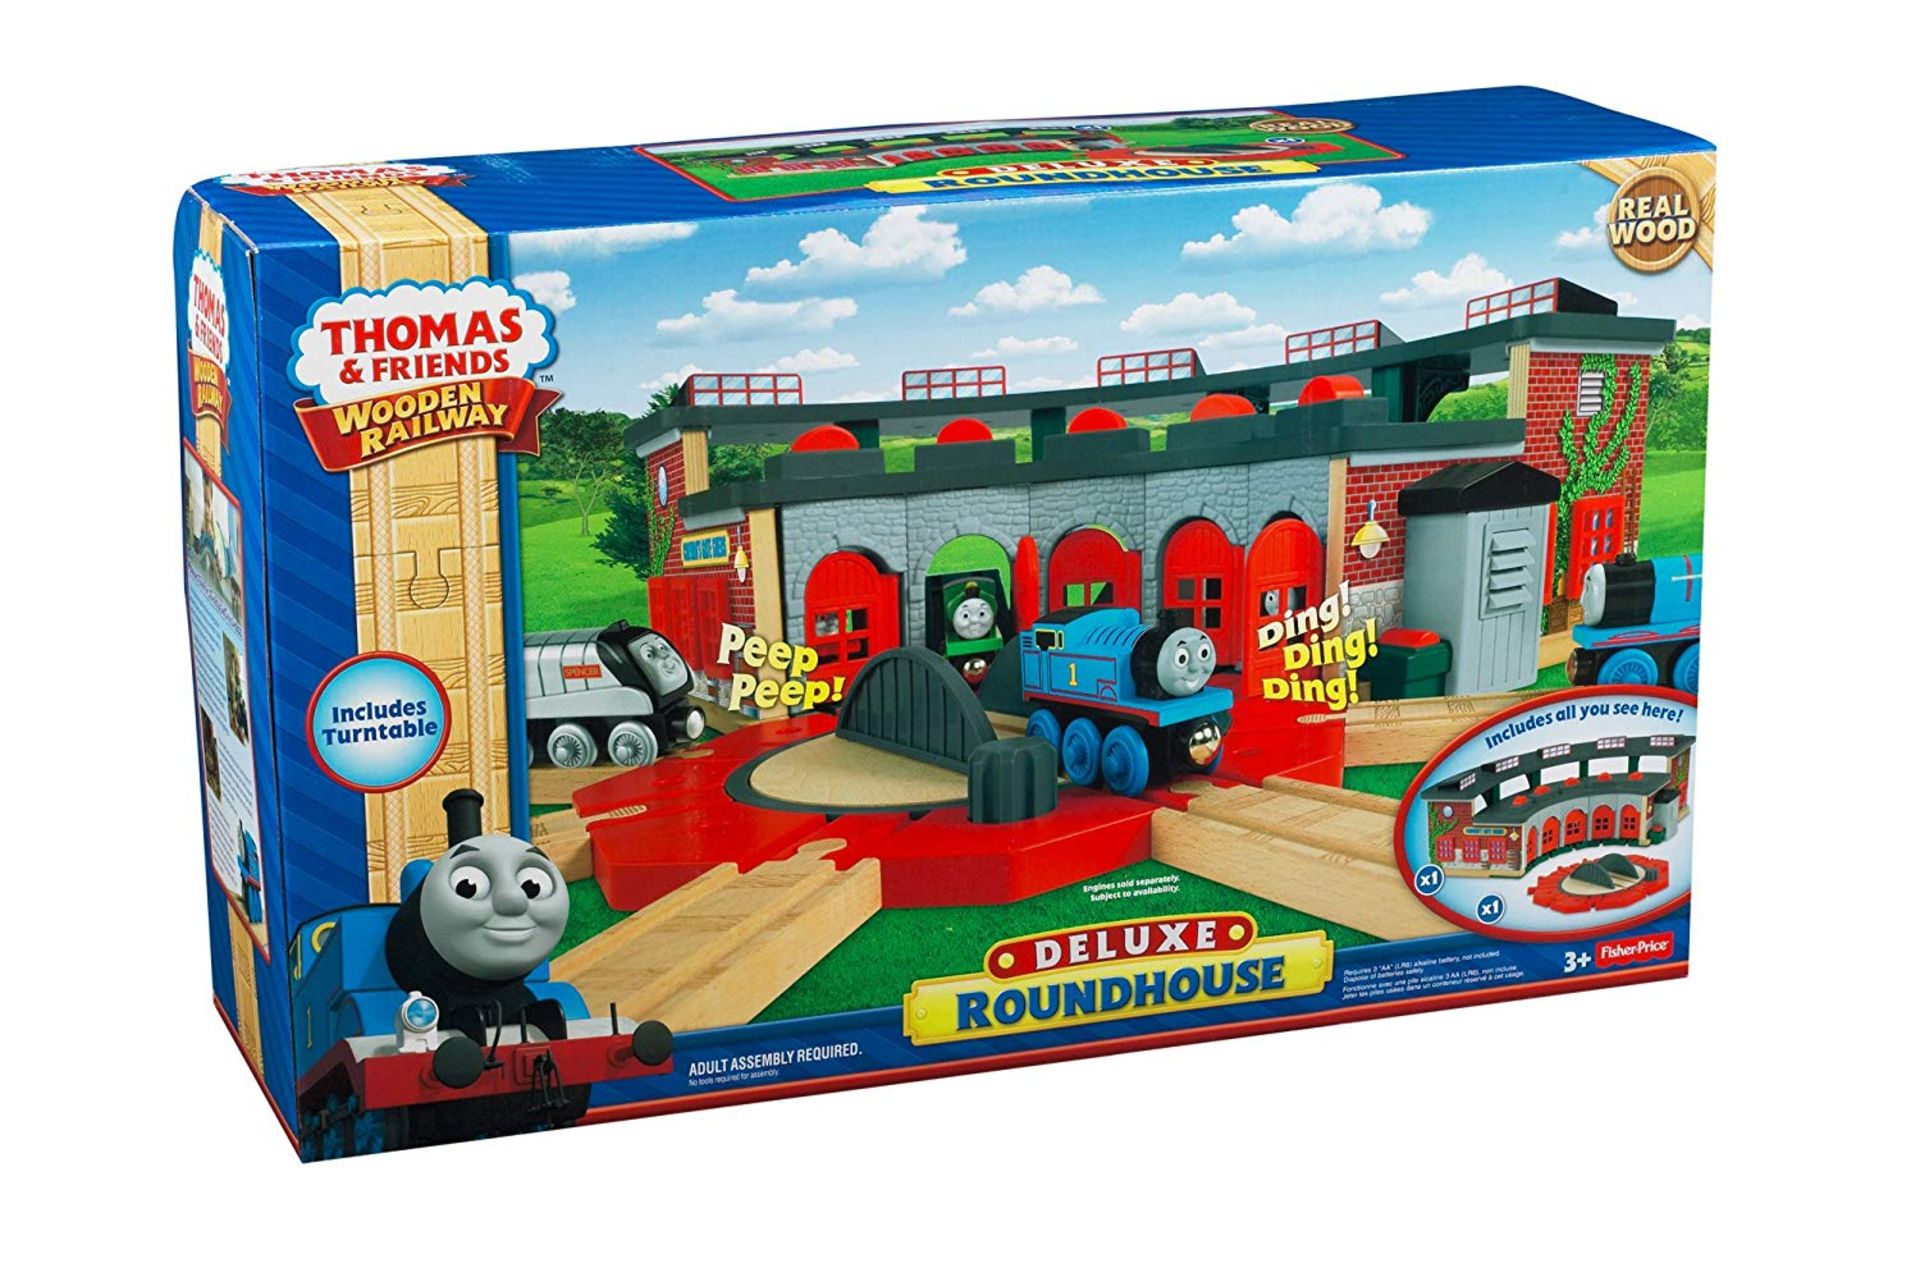 2 x THOMAS WOODEN RAILWAY-DELUXE ROUNDHOUSE | 746775214845 | RRP £ 180 DAMAGED PACKAGING - Image 3 of 3